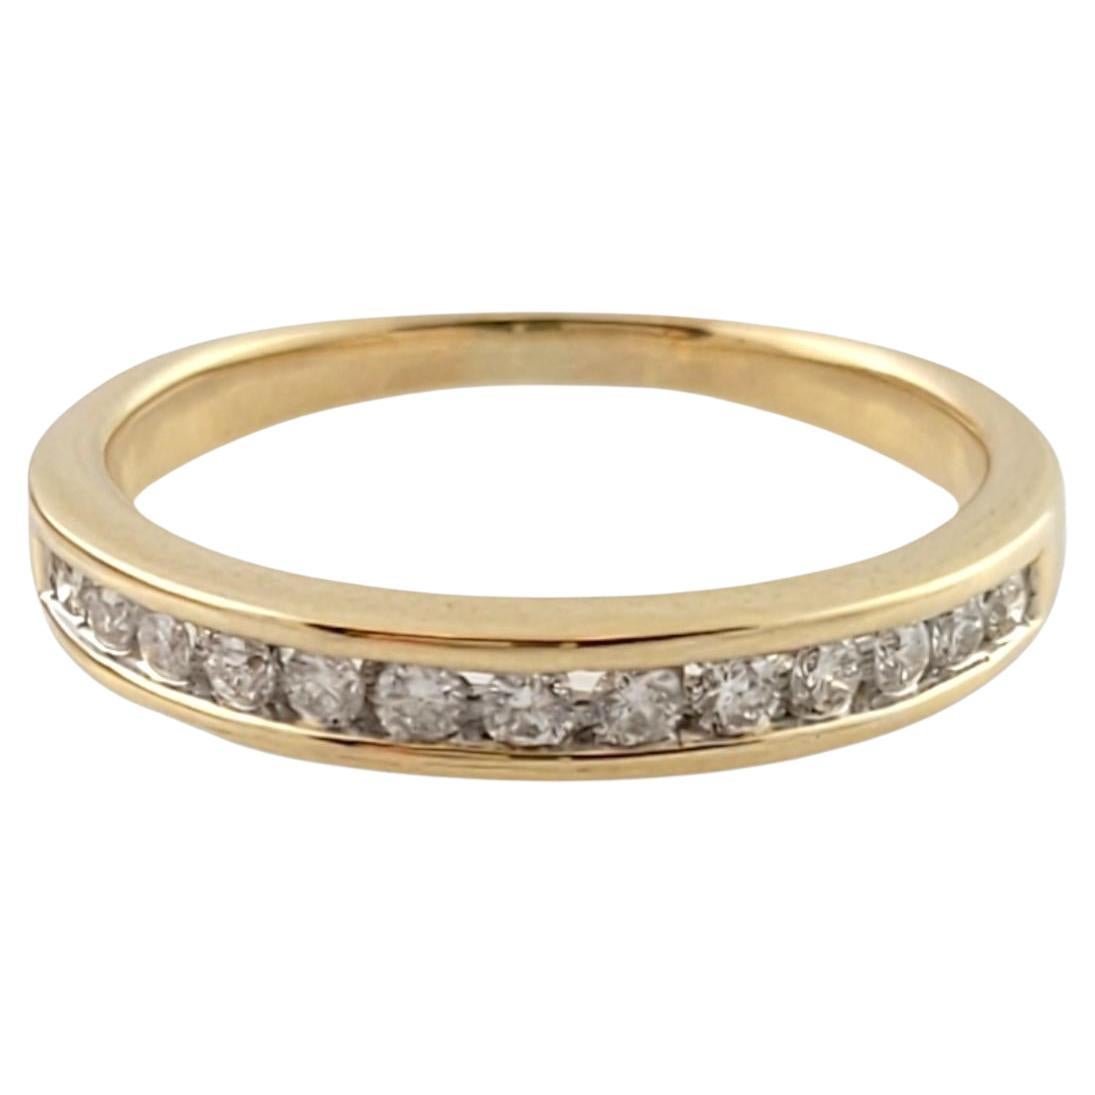 14K Yellow Gold Diamond Band Size 6.25 #15890 For Sale